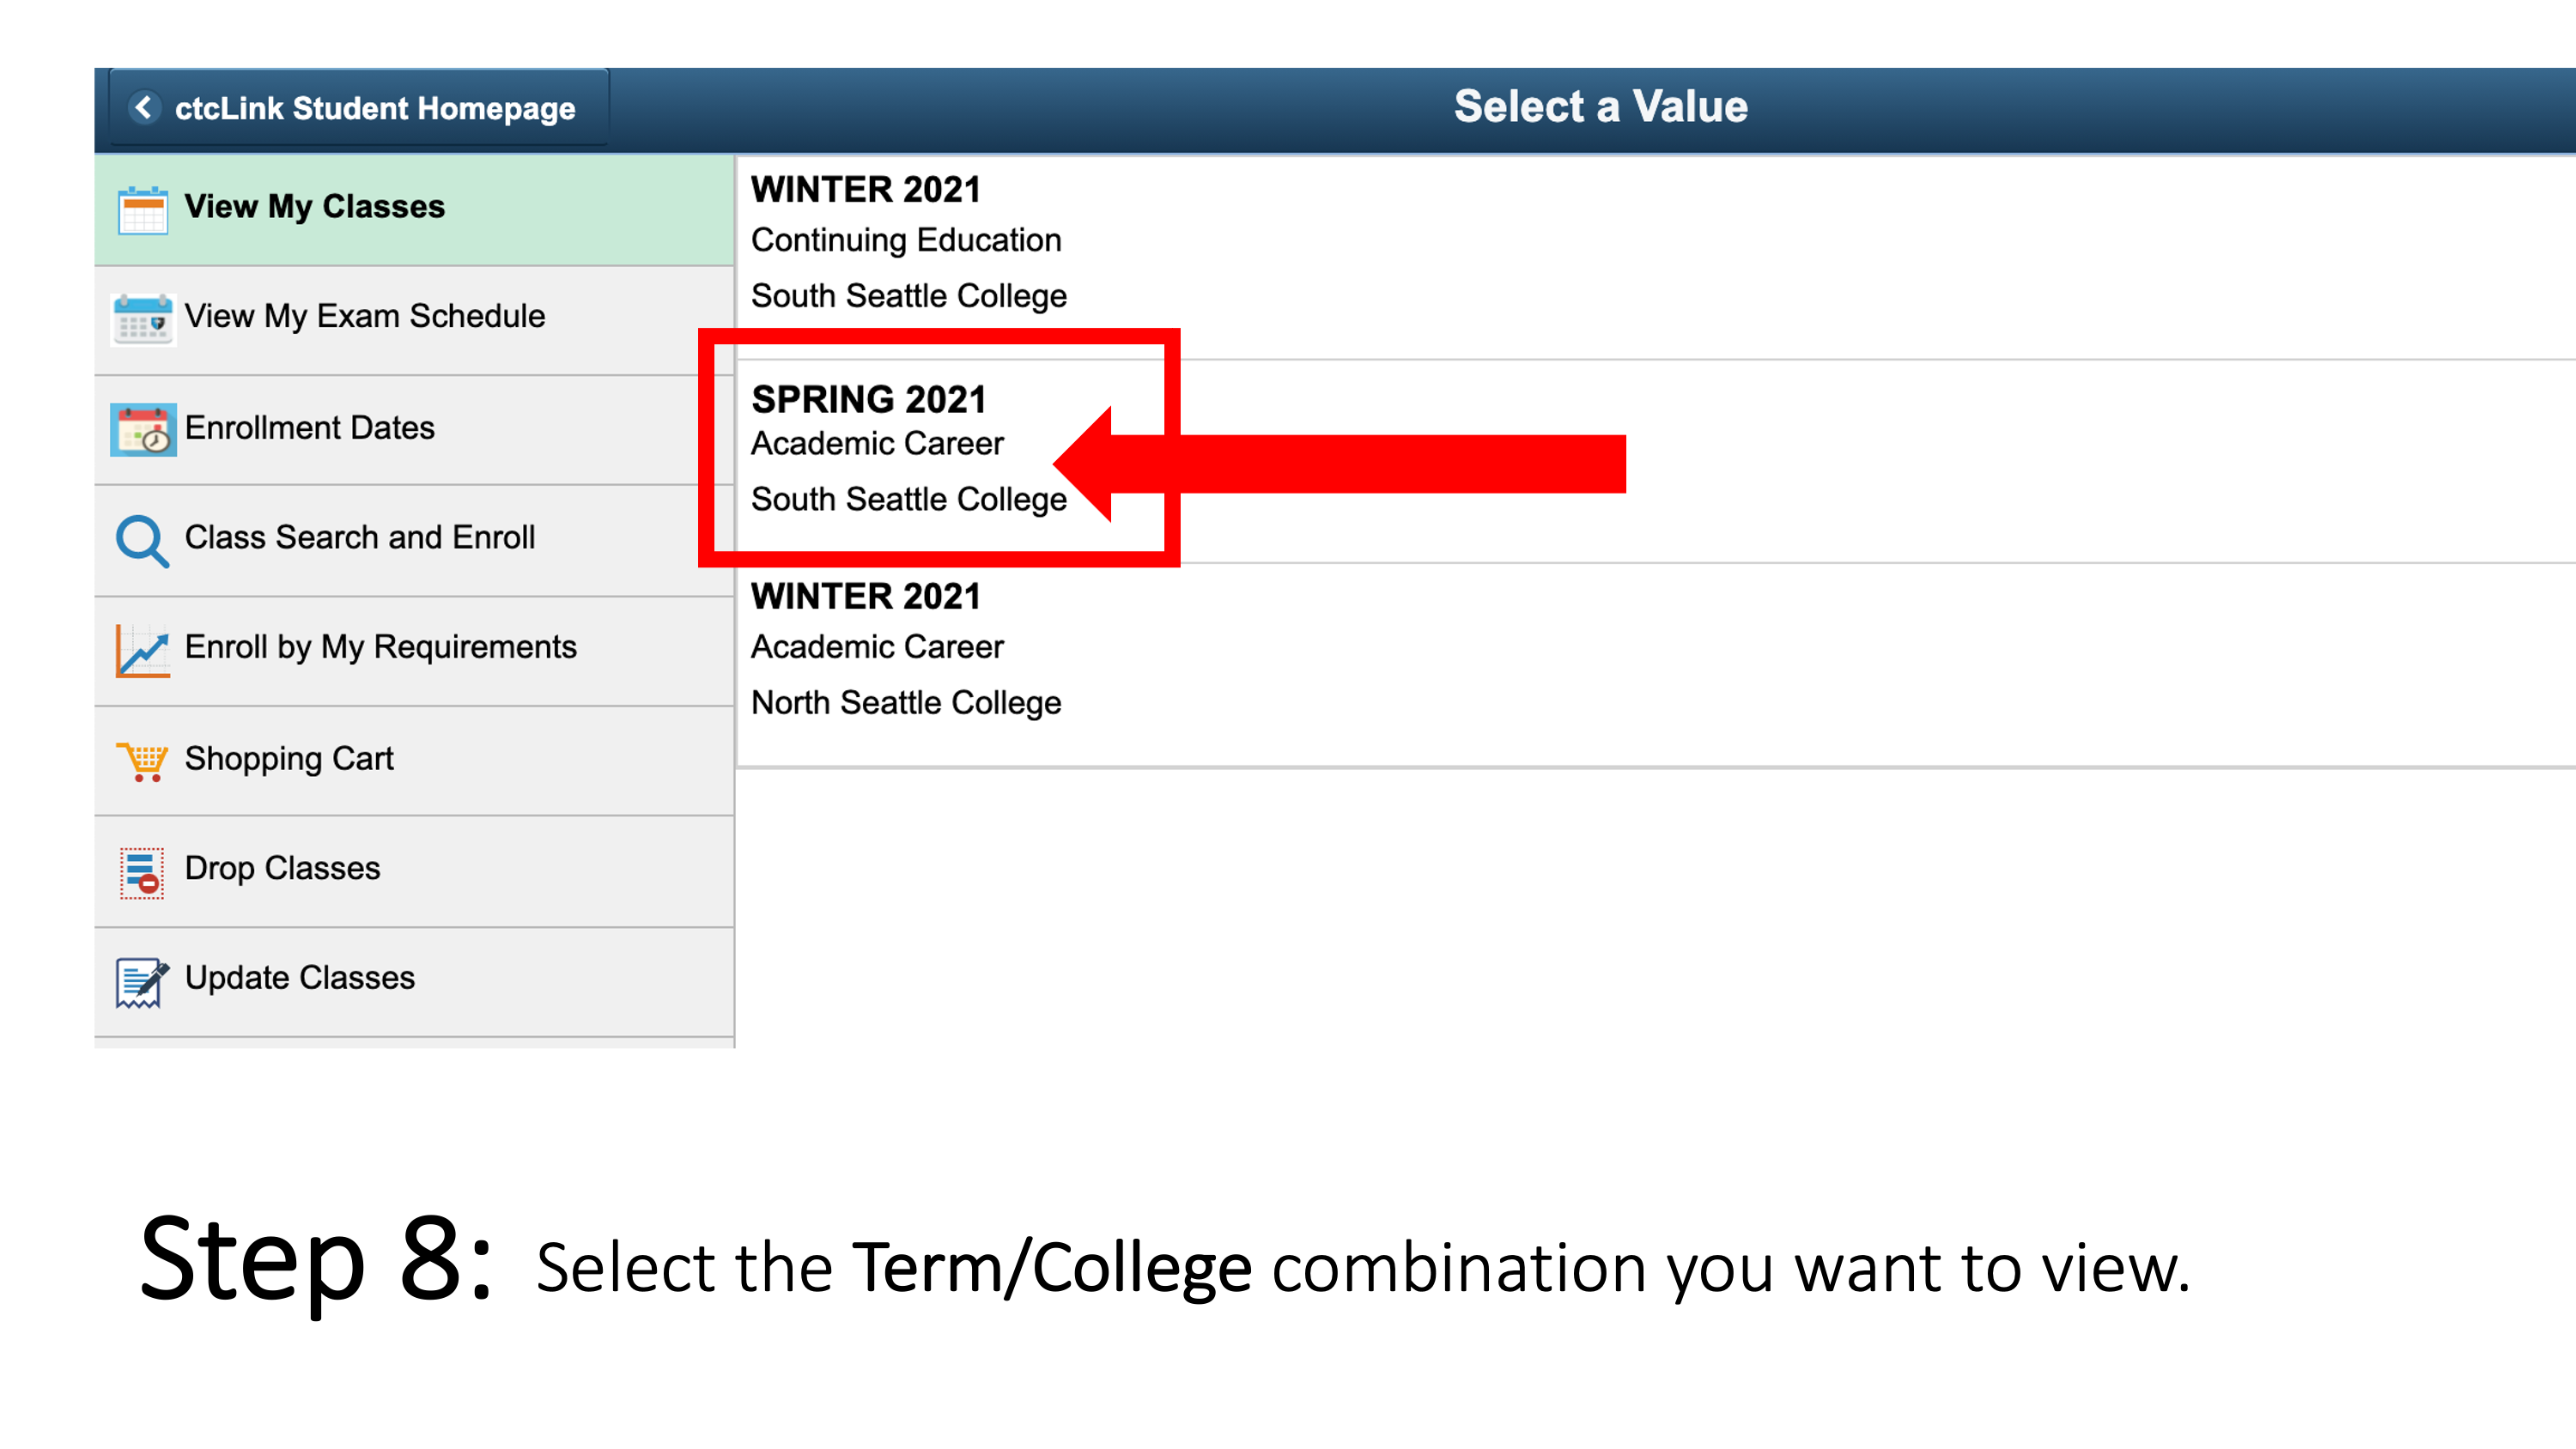 Select the Term/College combination you want to view.